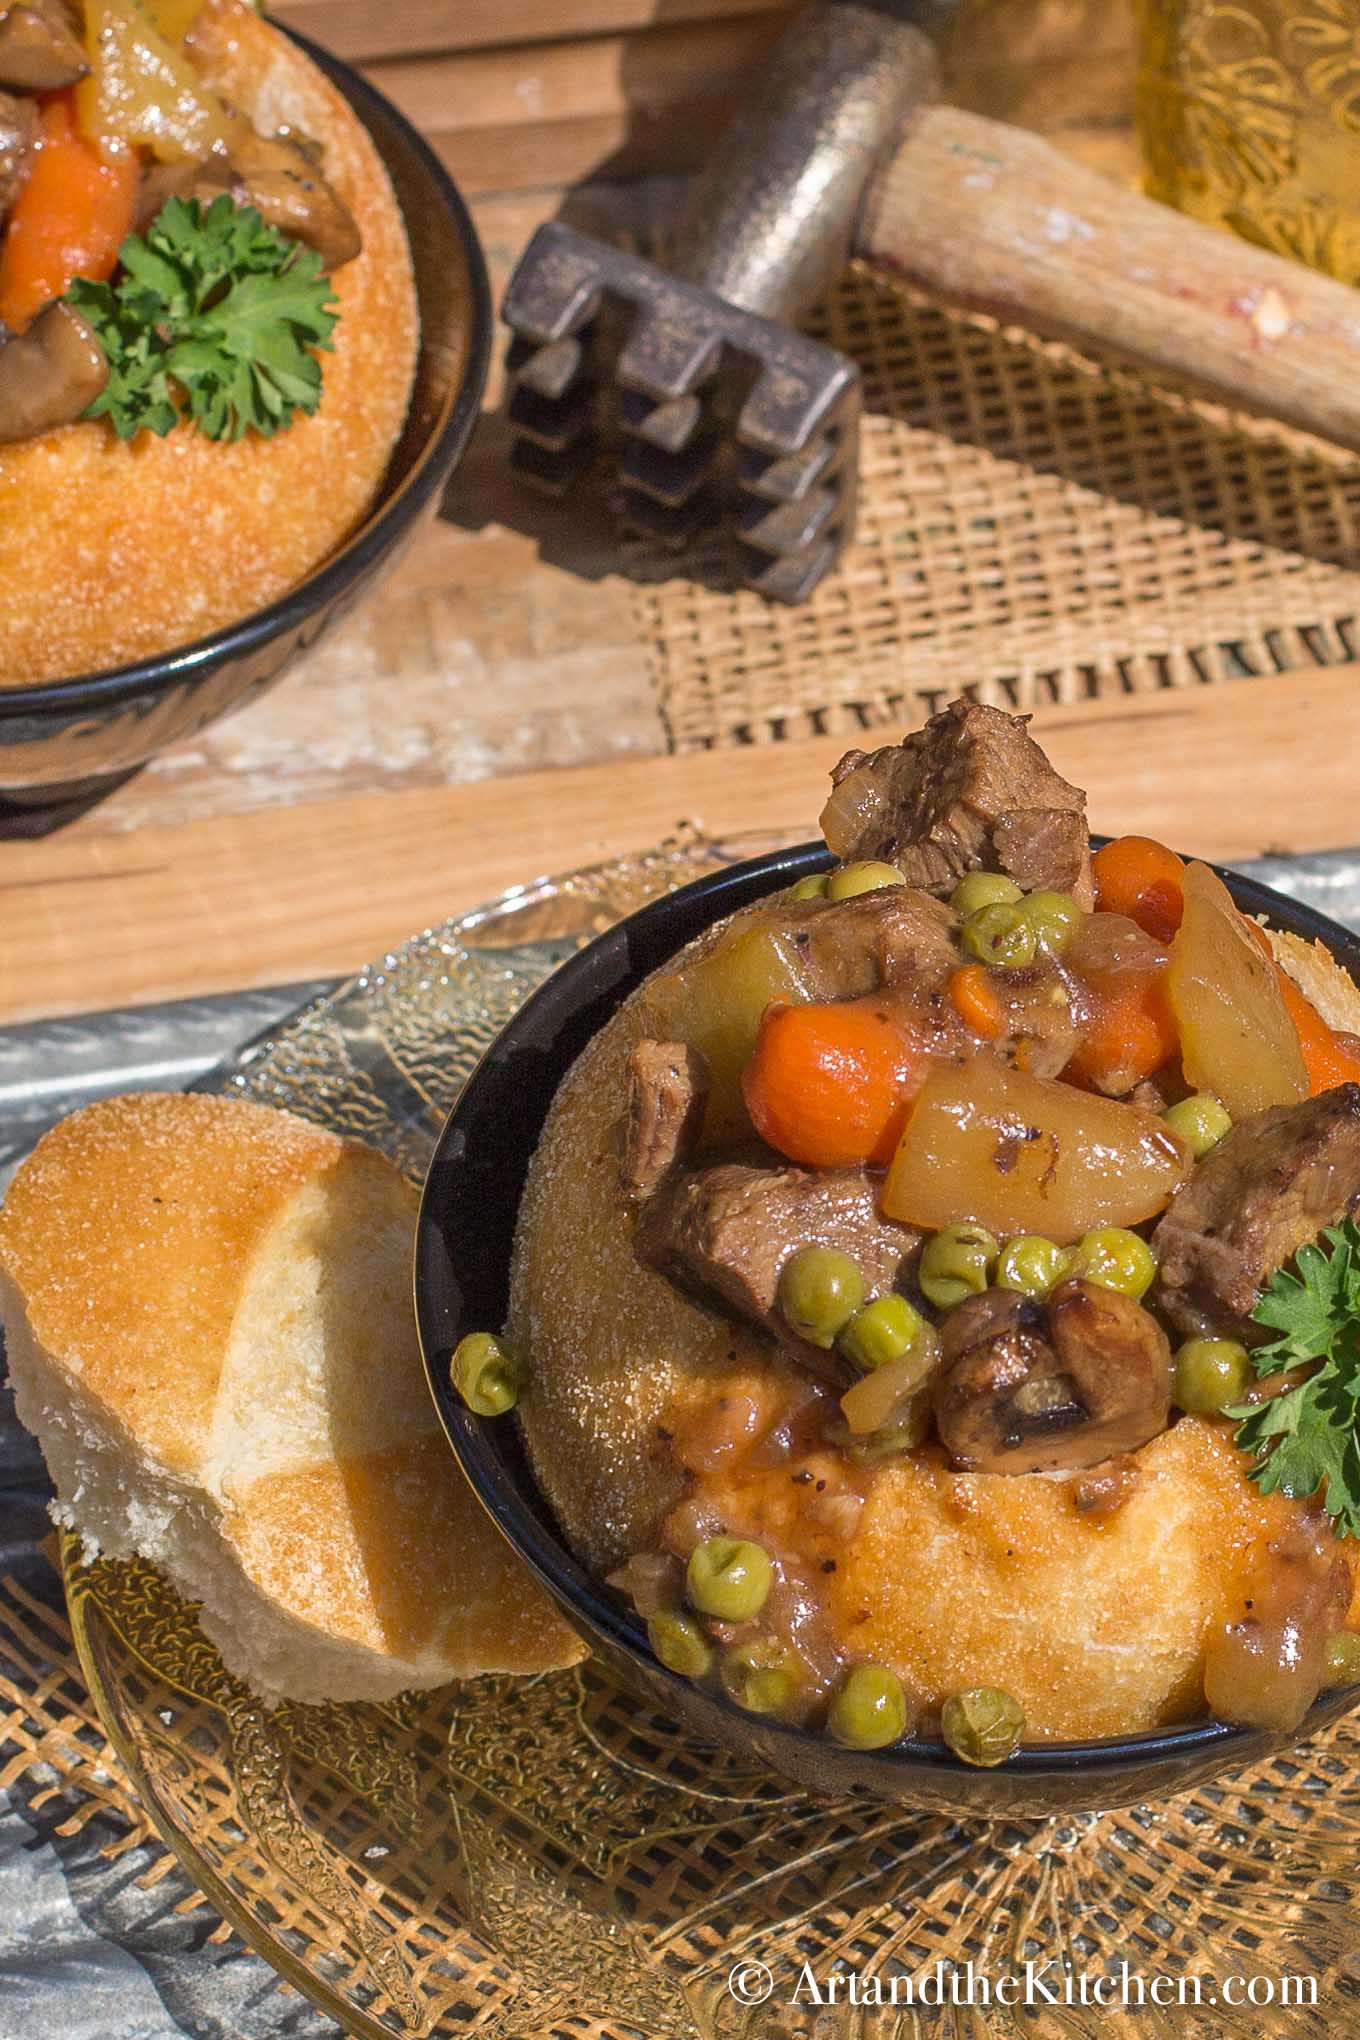 Beef stew in a bread bowl.